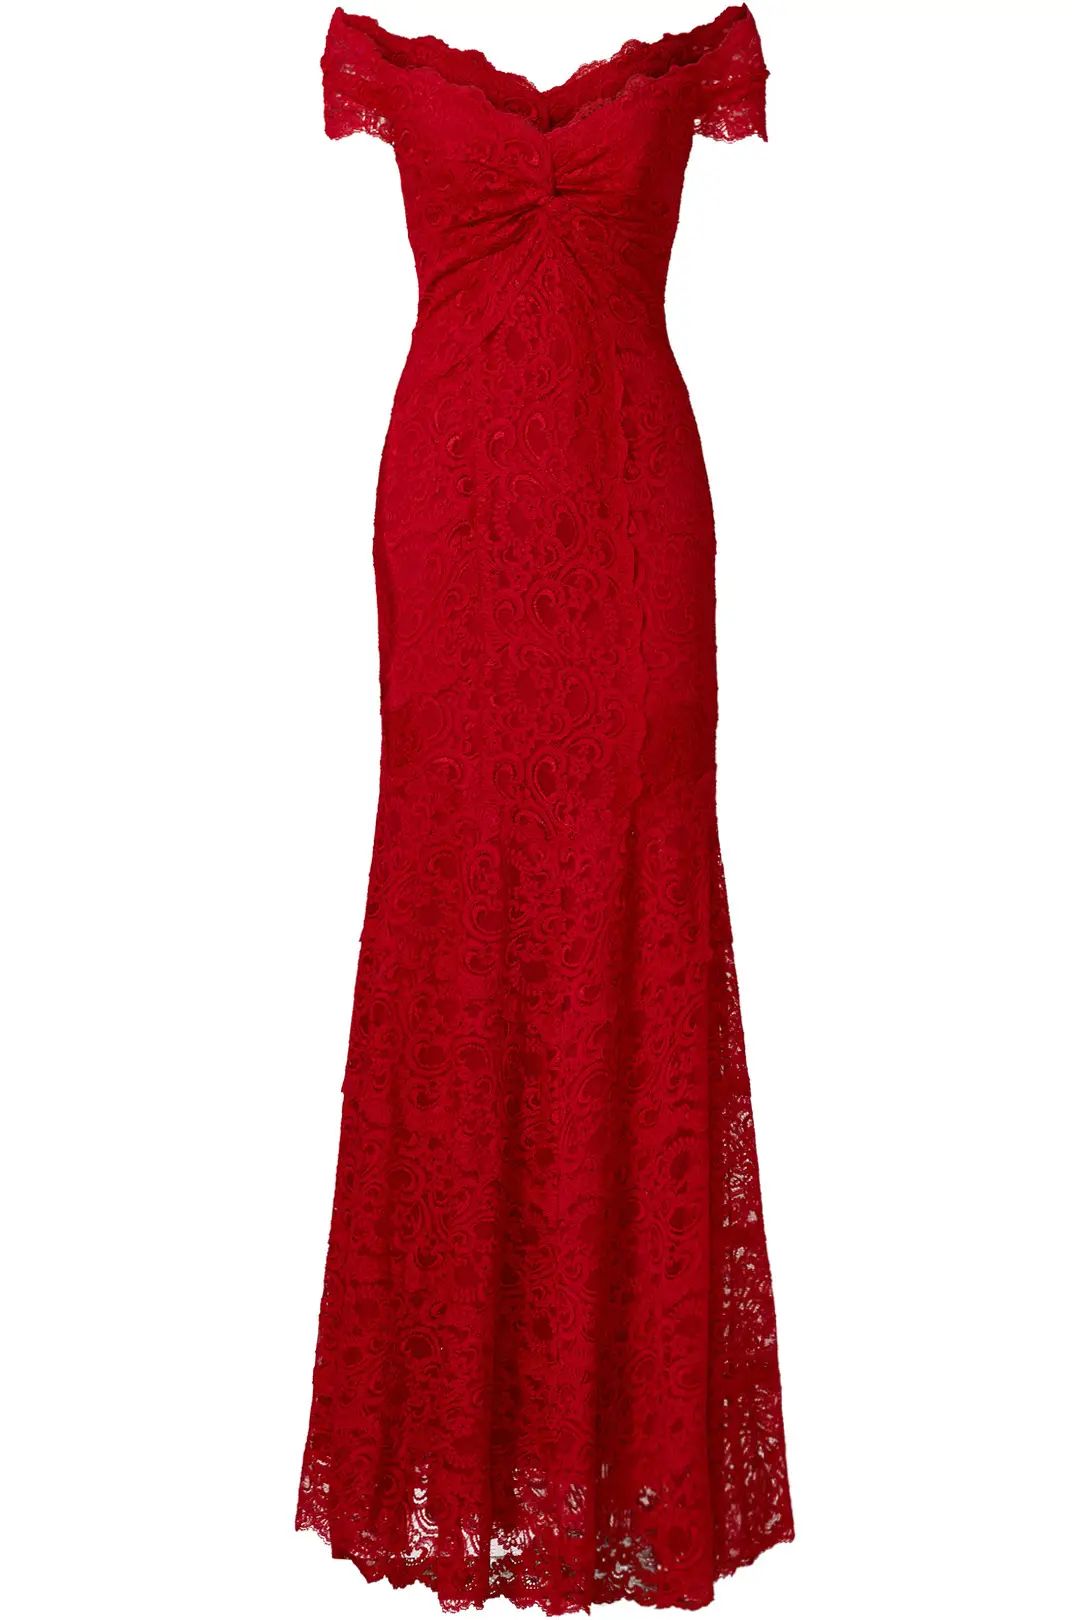 Nicole Miller Red Tempted By You Gown | Rent The Runway